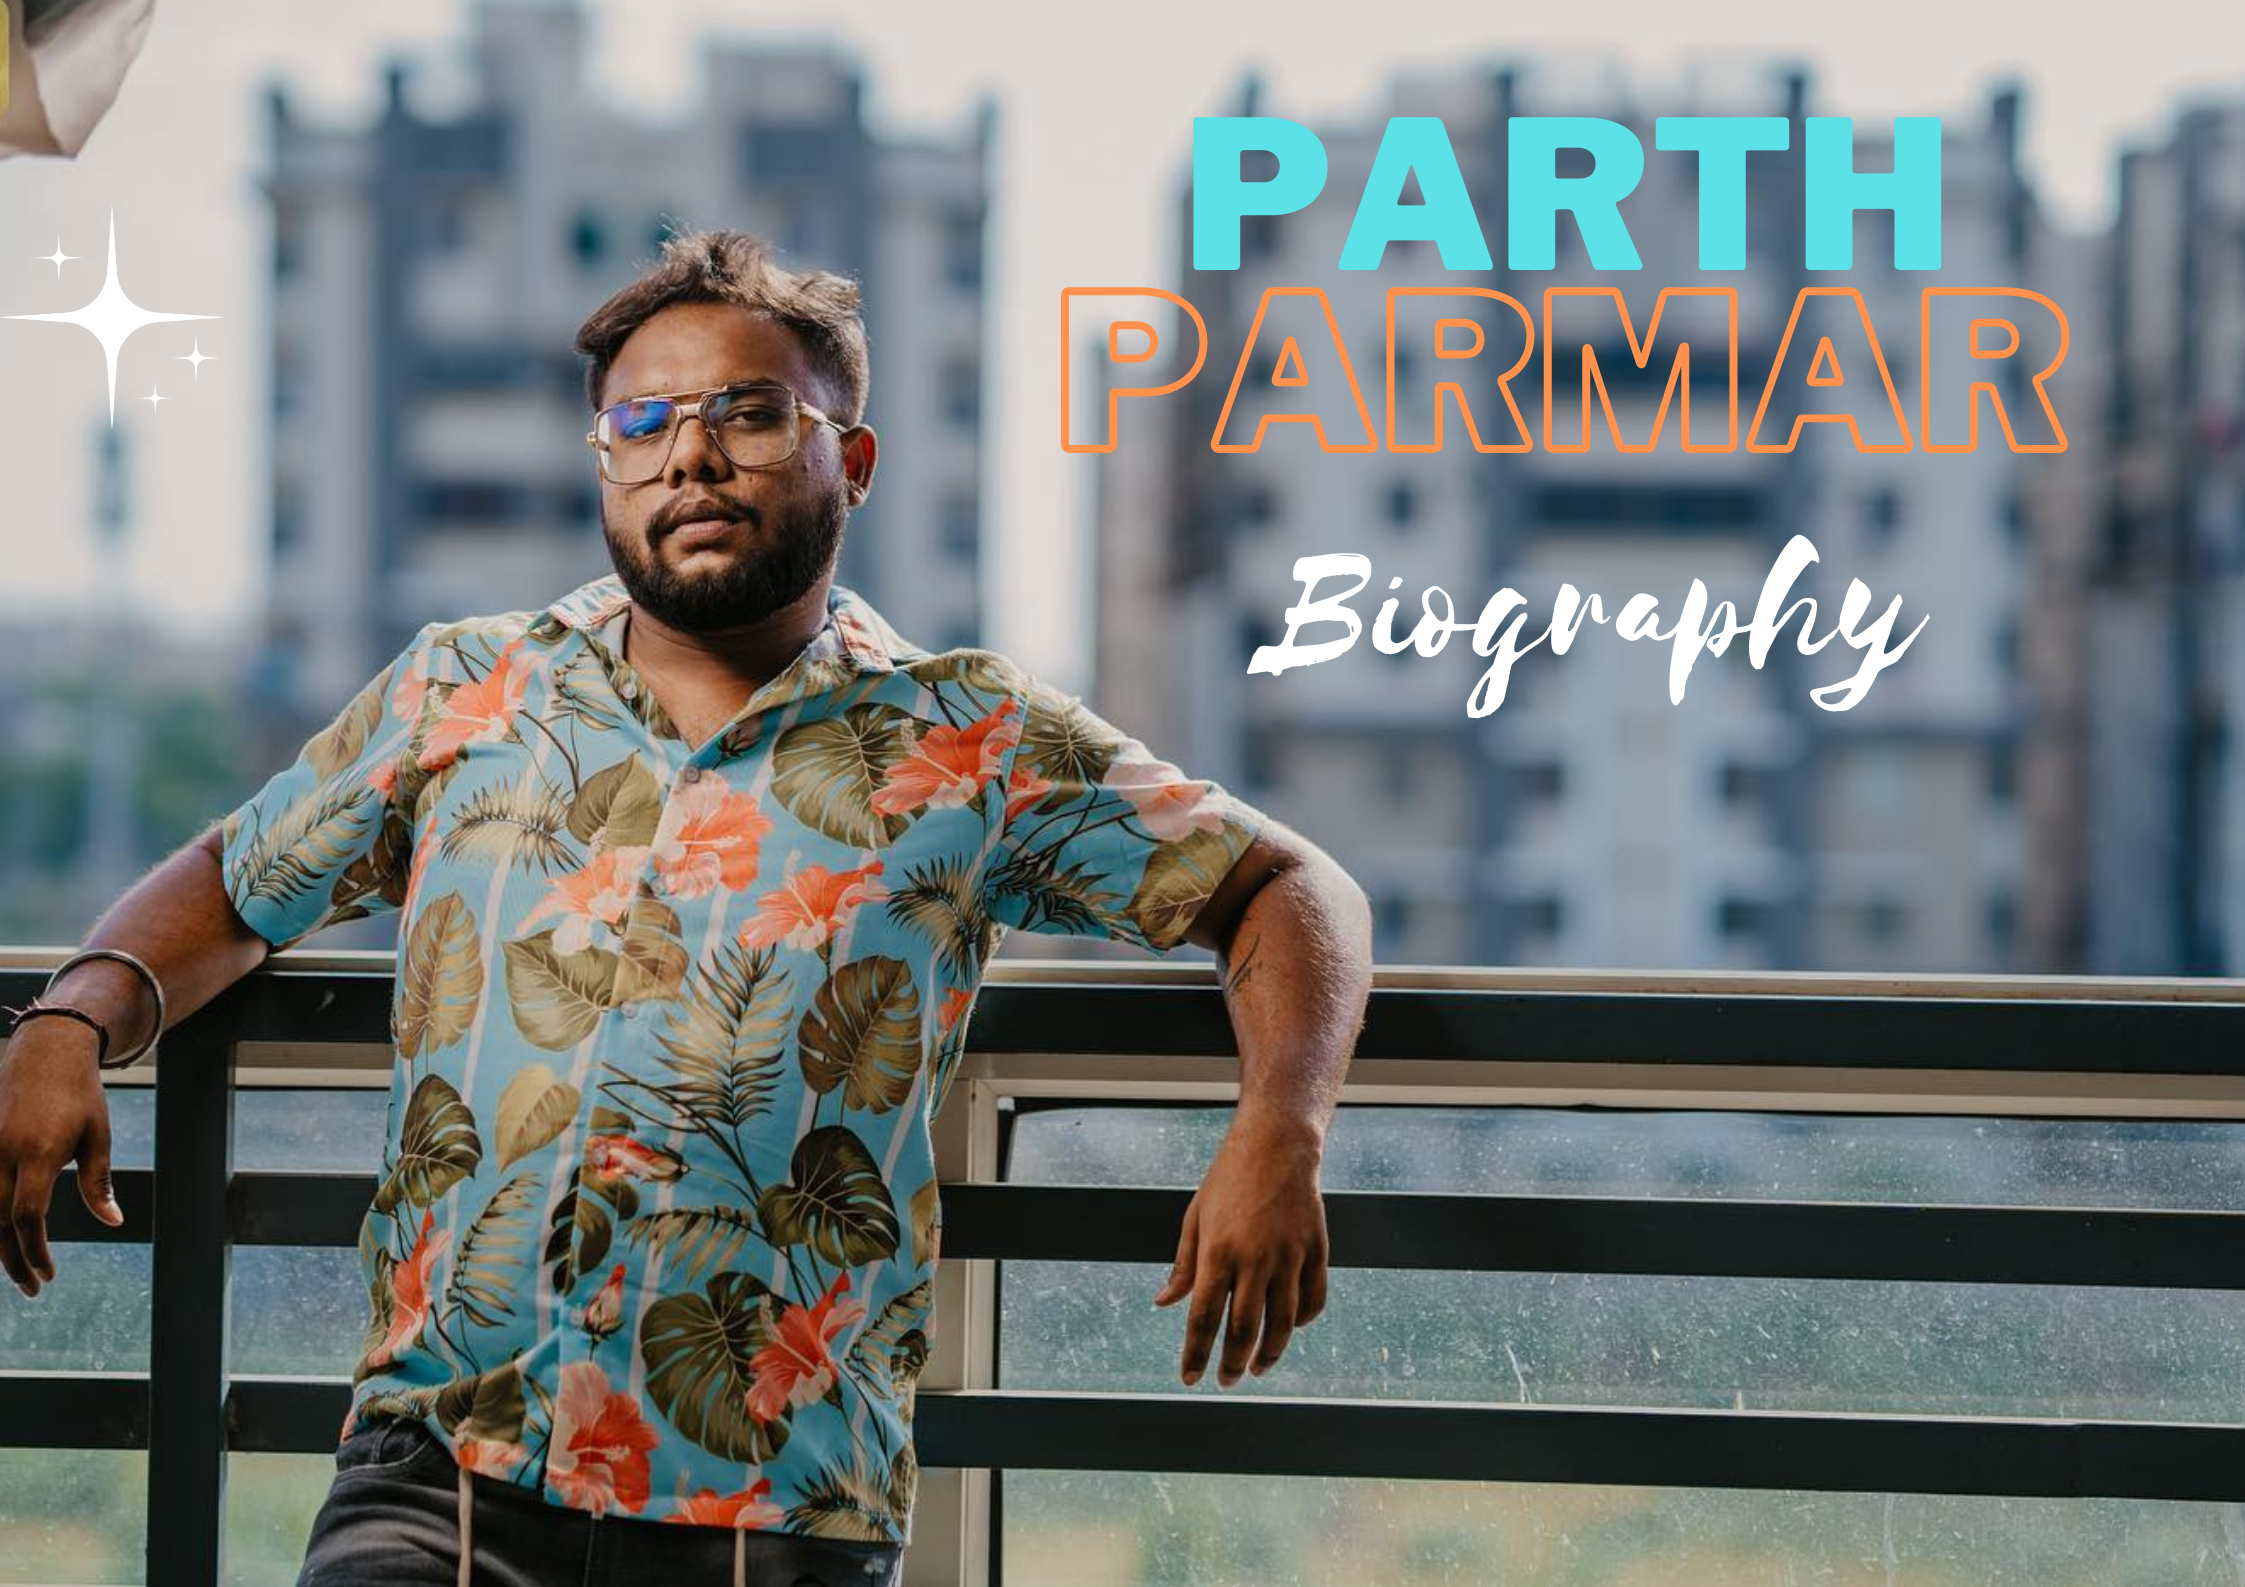 Parth Parmar (whoparthyo) Biography, Education Age, Career, Income 2022